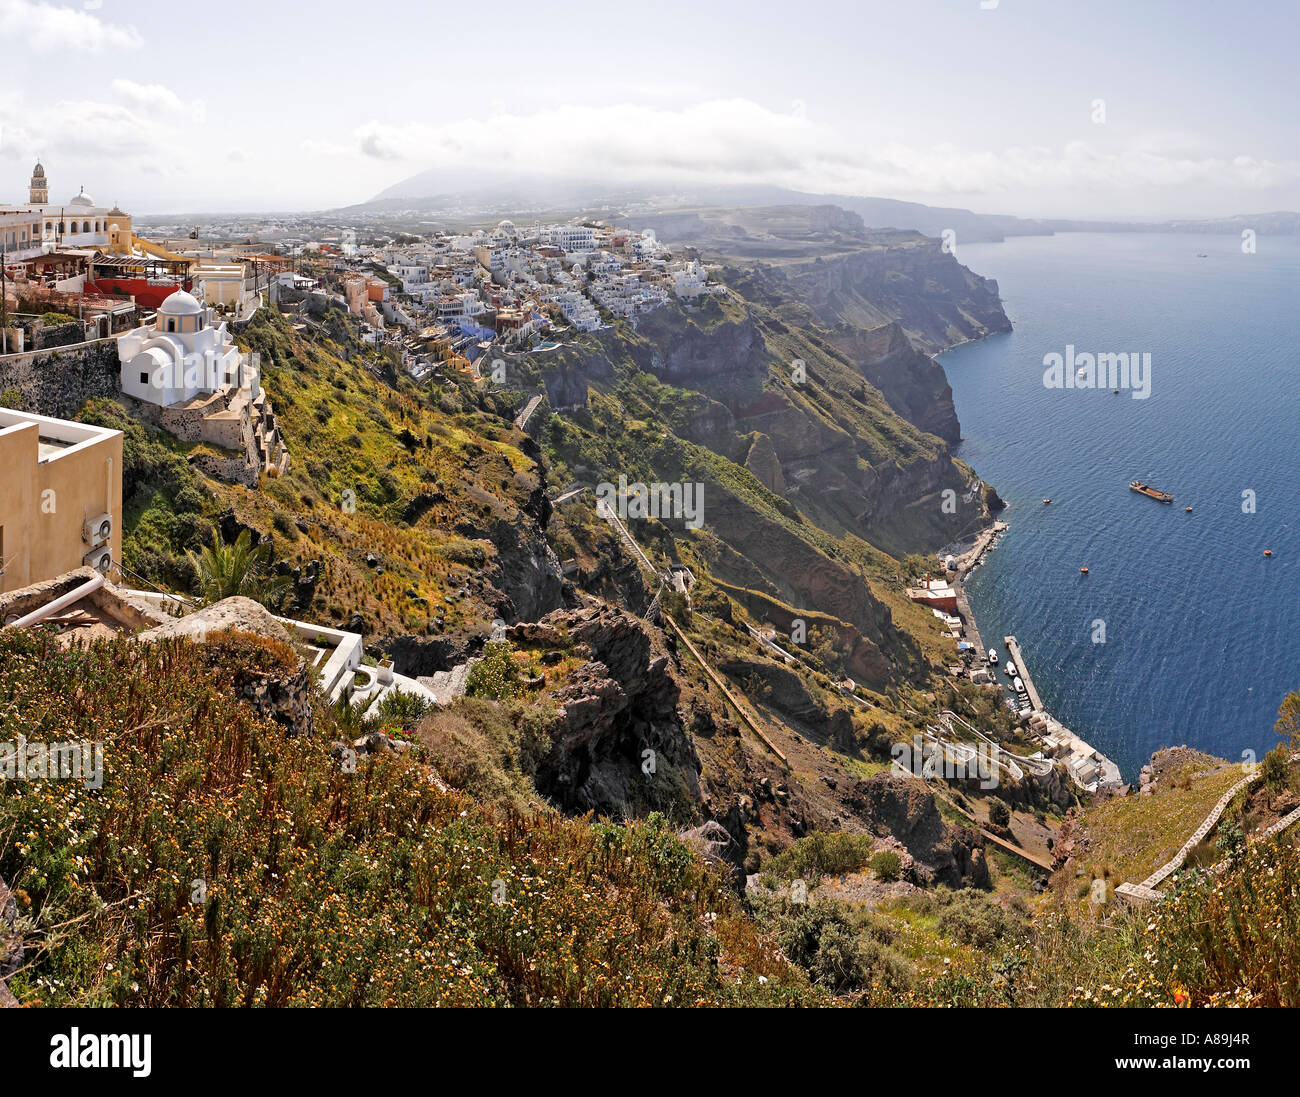 View over the town situated at the edge of the caldera, Thira, Santorini, Greece Stock Photo